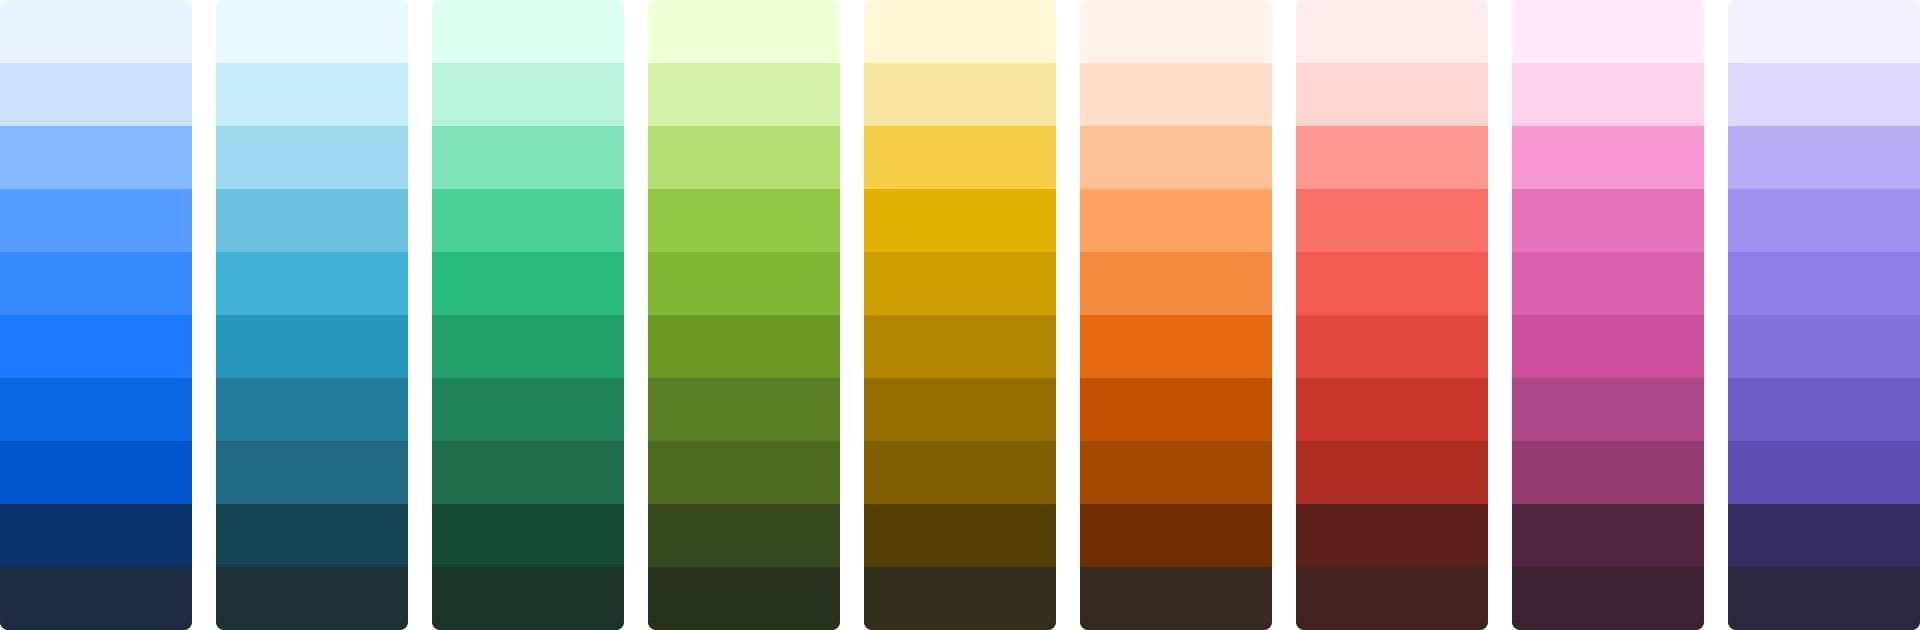 Color ramps for all saturated colors, which are blue, teal, green, lime, yellow, orange, red, magenta, and purple.